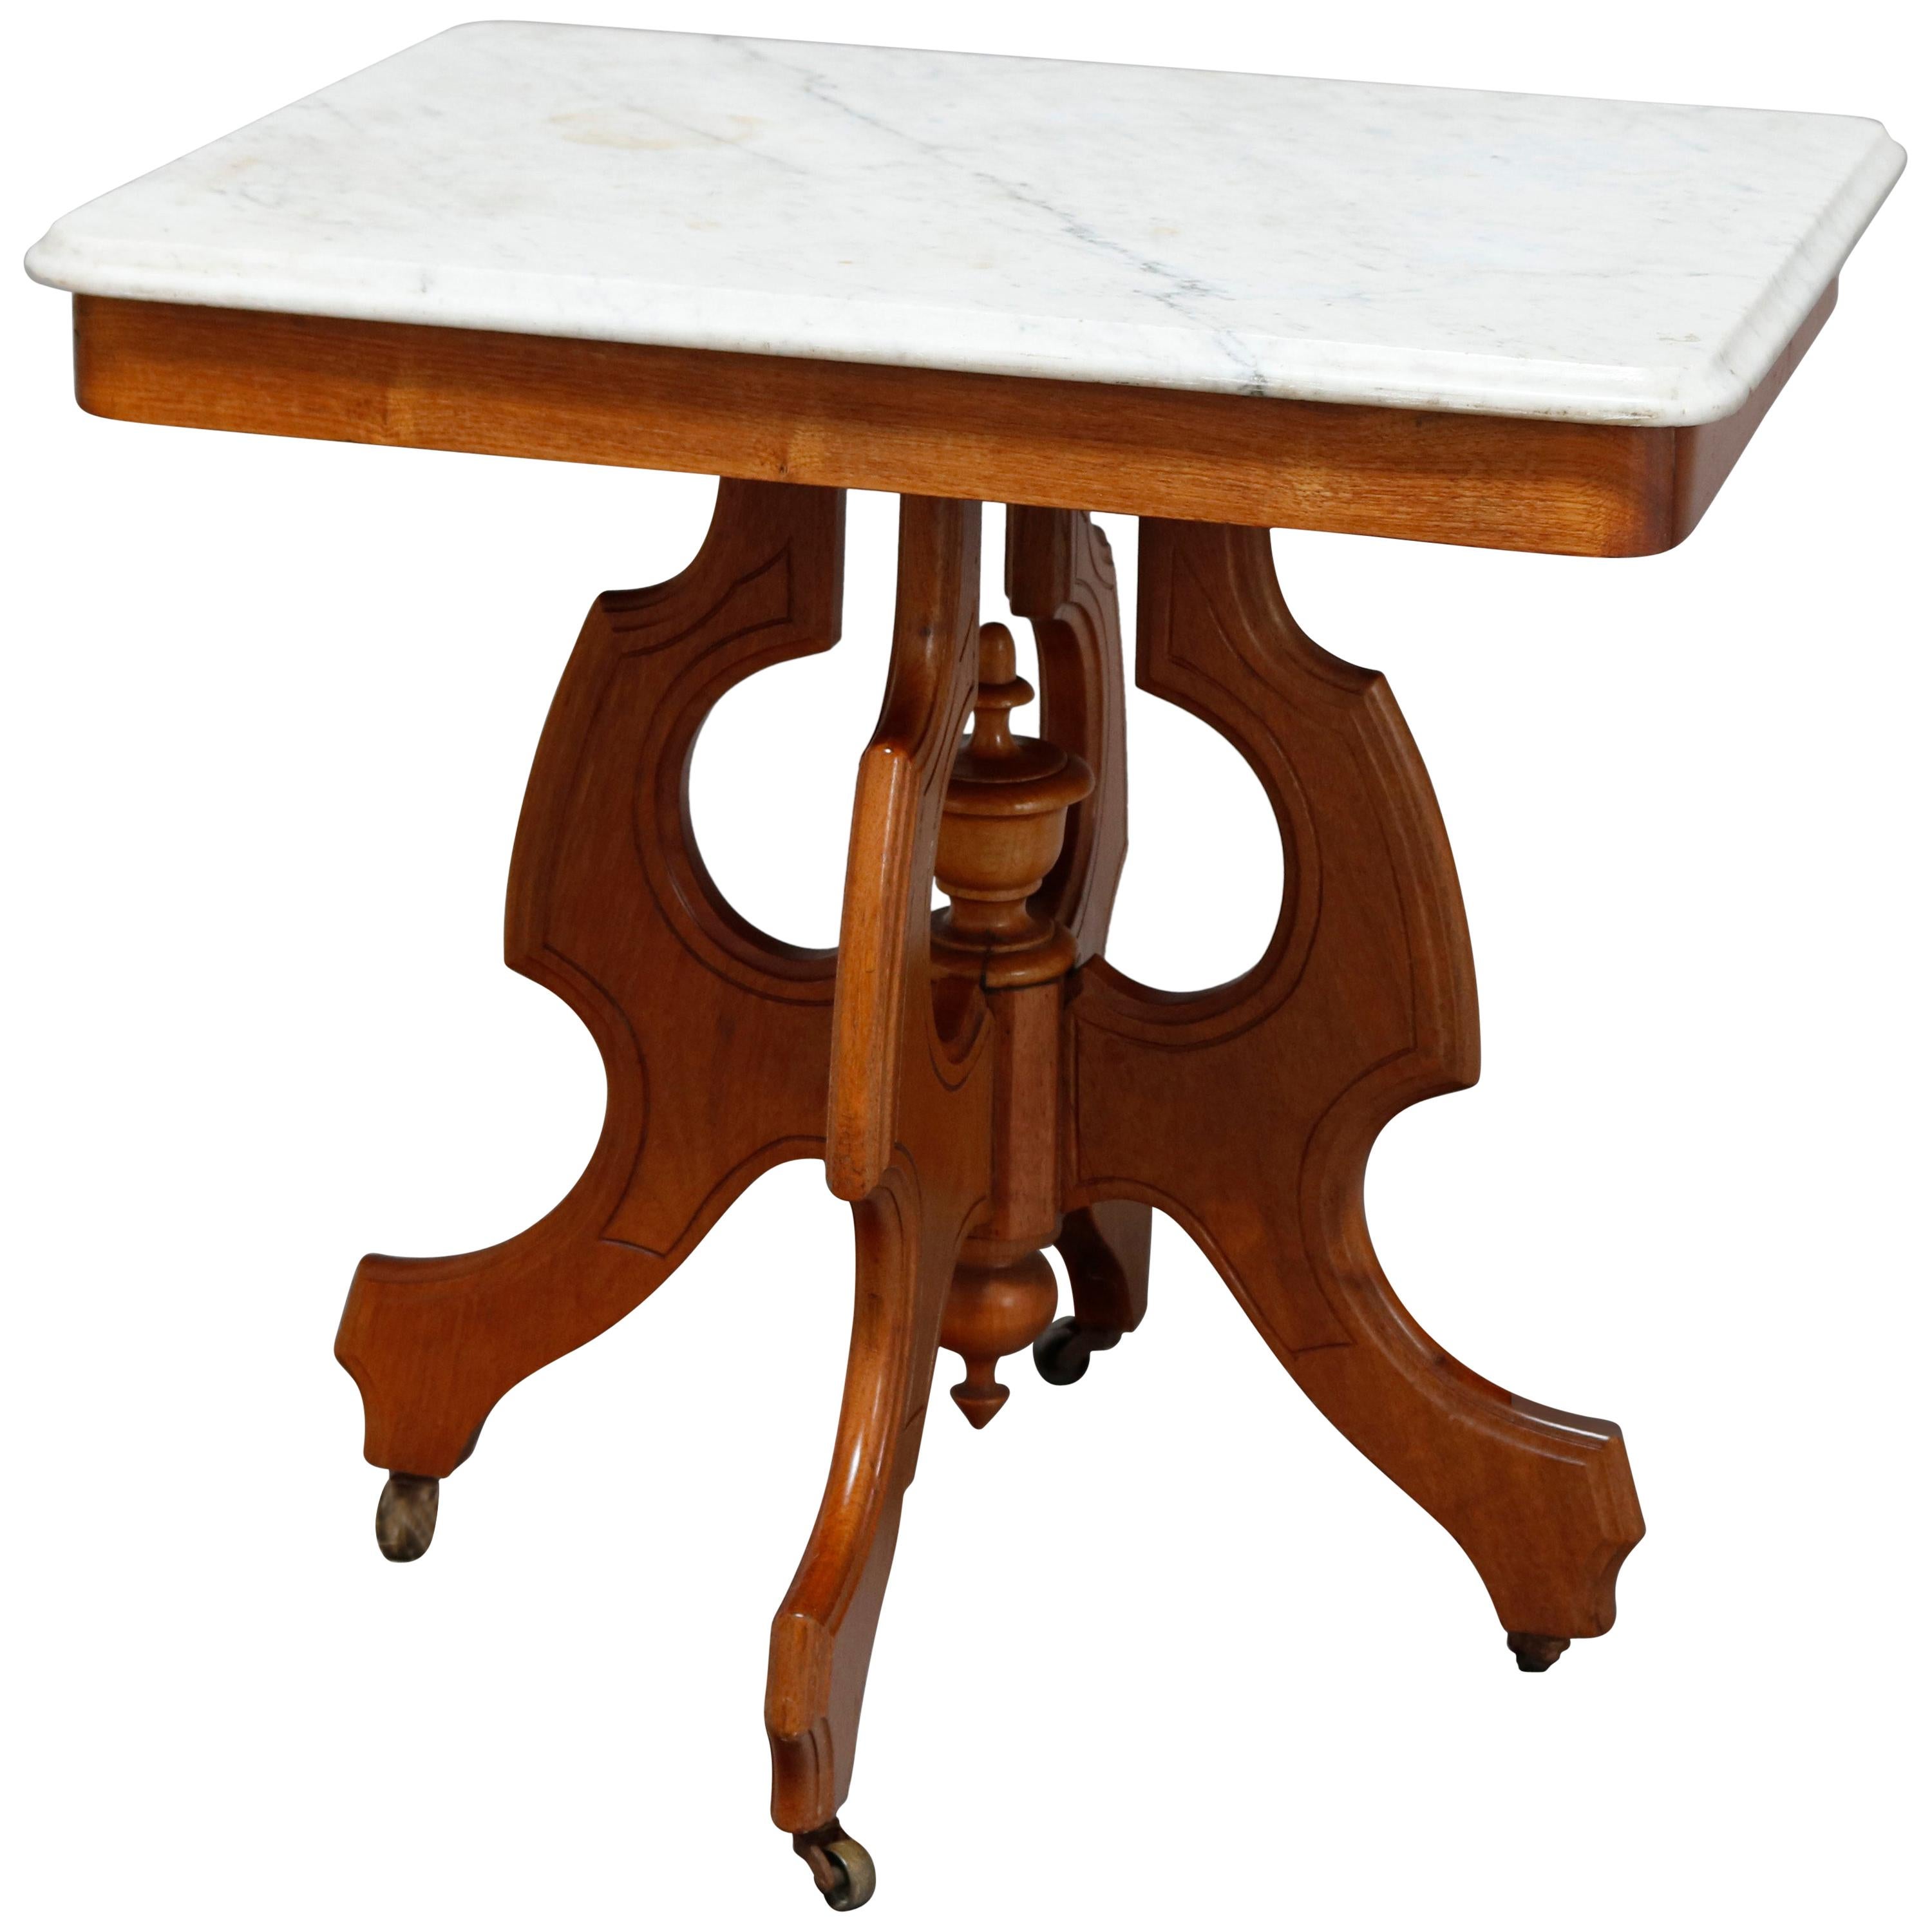 Antique Victorian Carved Walnut and Beveled Marble Side Table, circa 1880